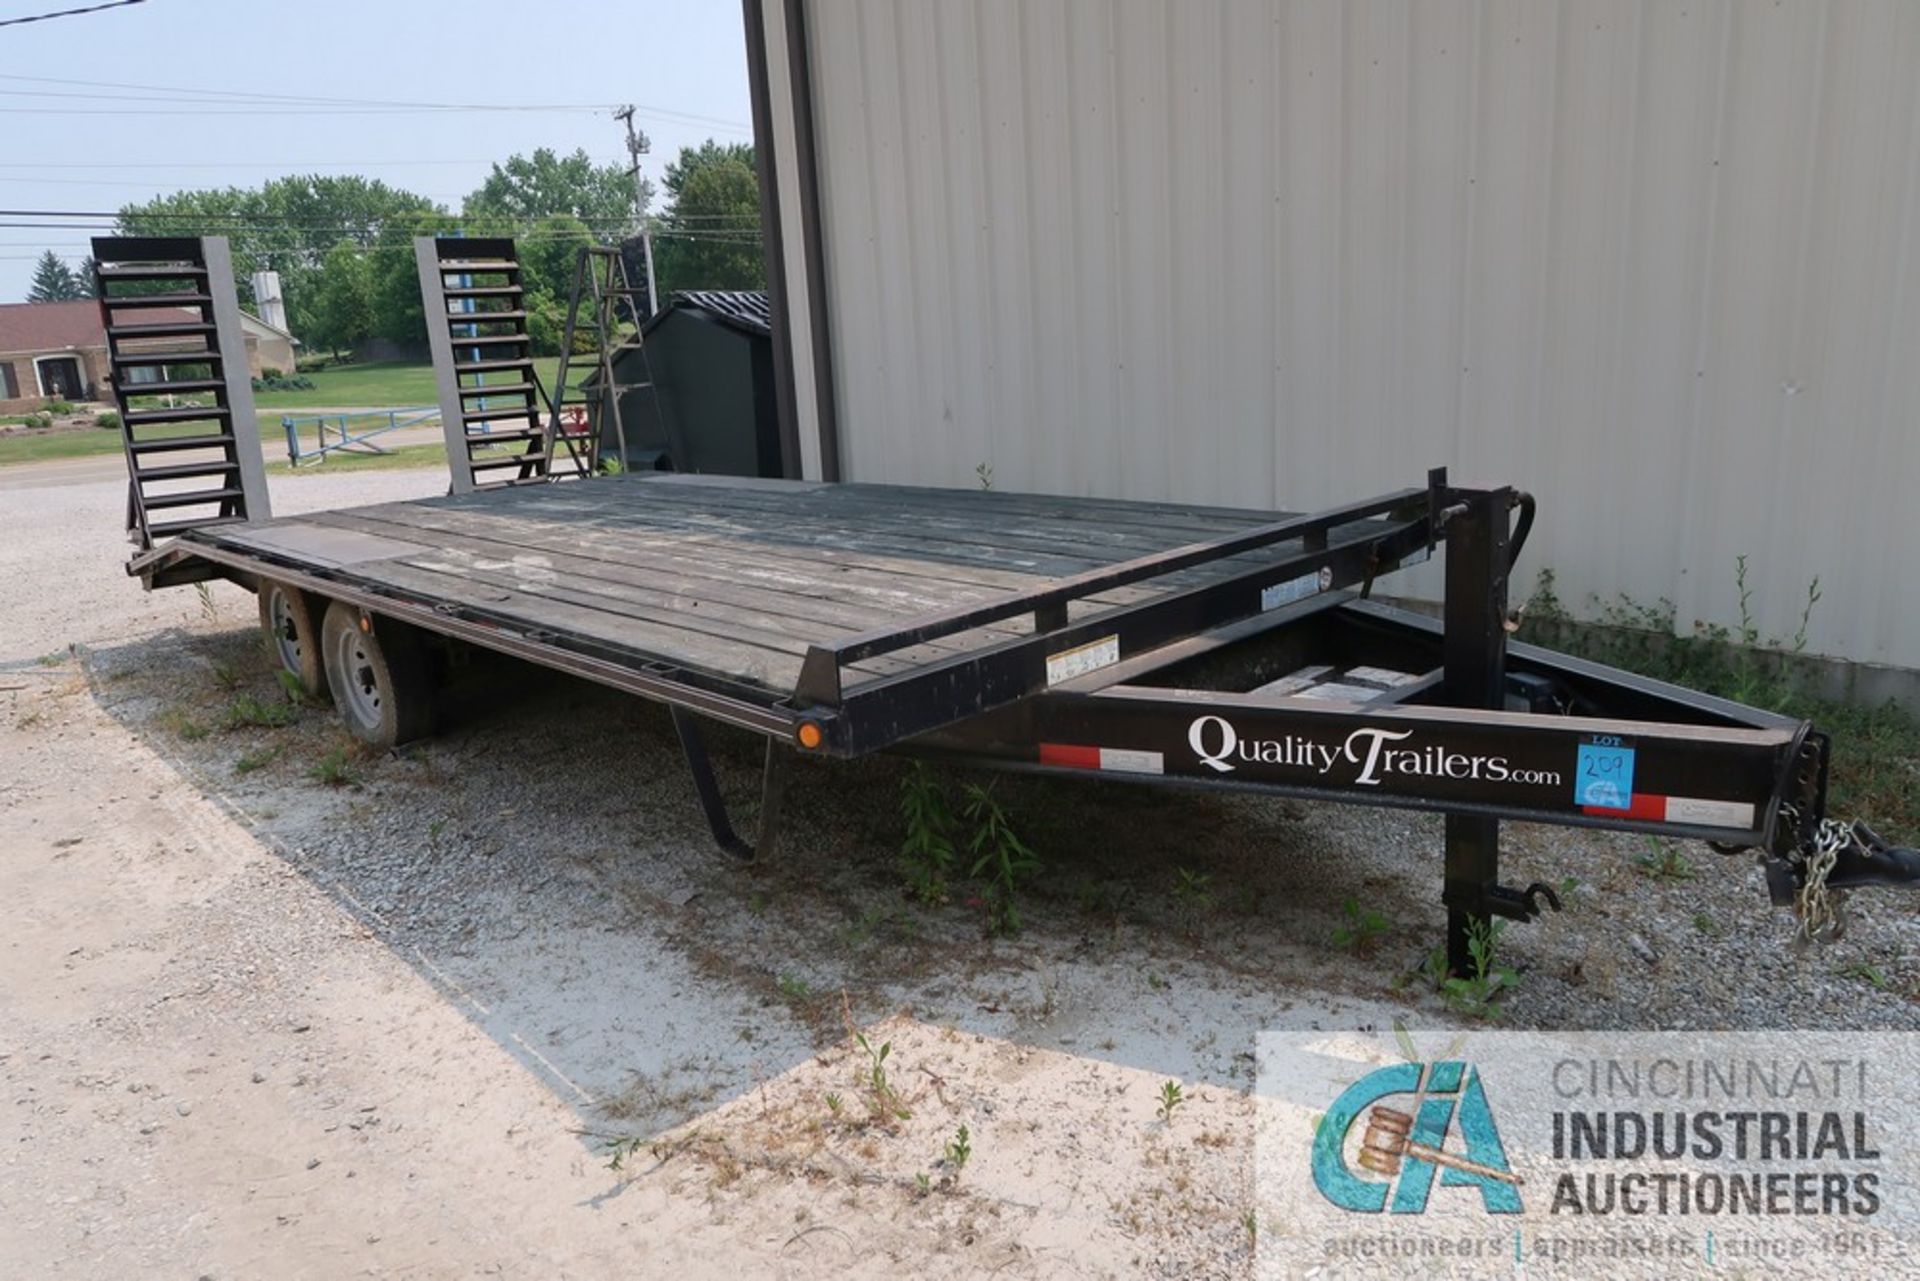 8'W X 16' QUALITY TRAILER TANDEM AXLE TRAILER; VIN # 550FP2029DS003430, 45" DOVETAIL, 64" RAMPS,